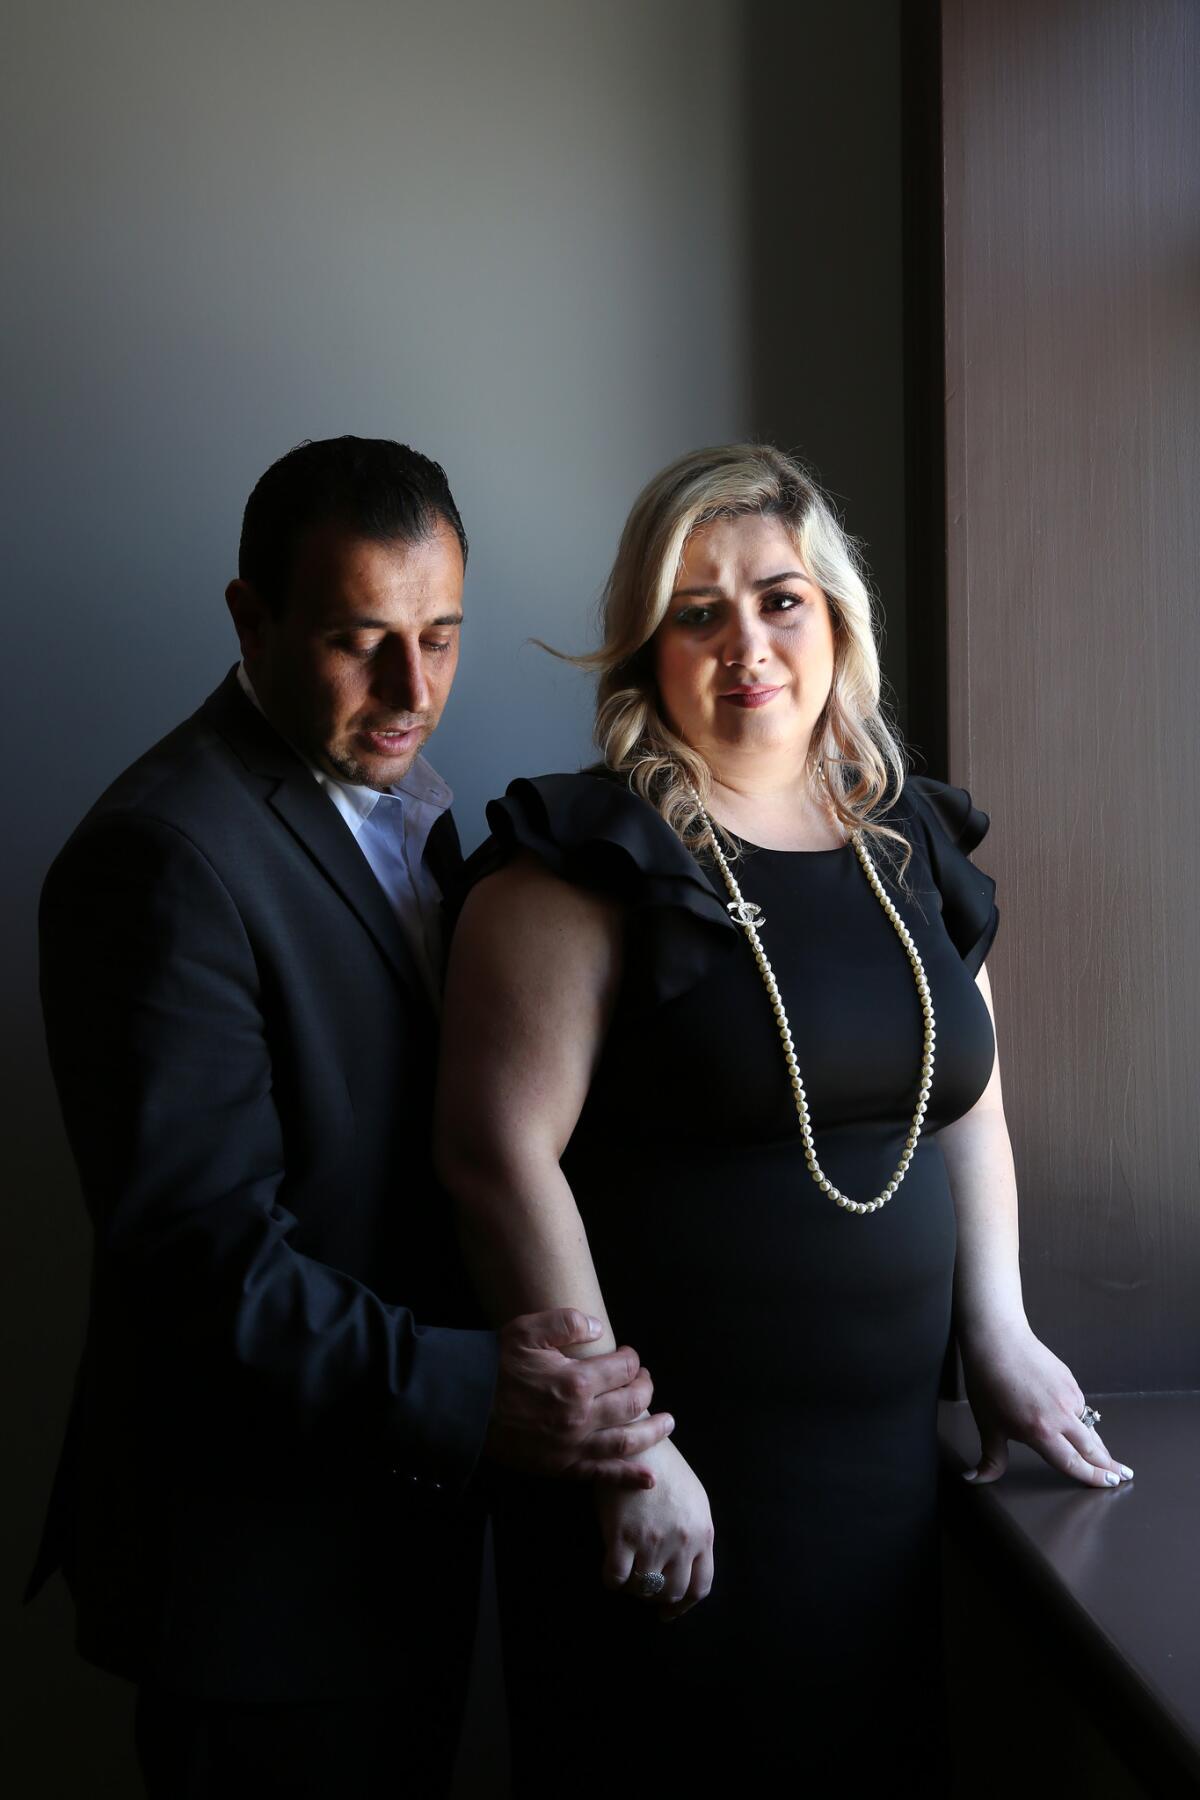 Ashot and Anni Manukyan of Glendale allege in a lawsuit that one of their embryos was implanted into the wrong woman.